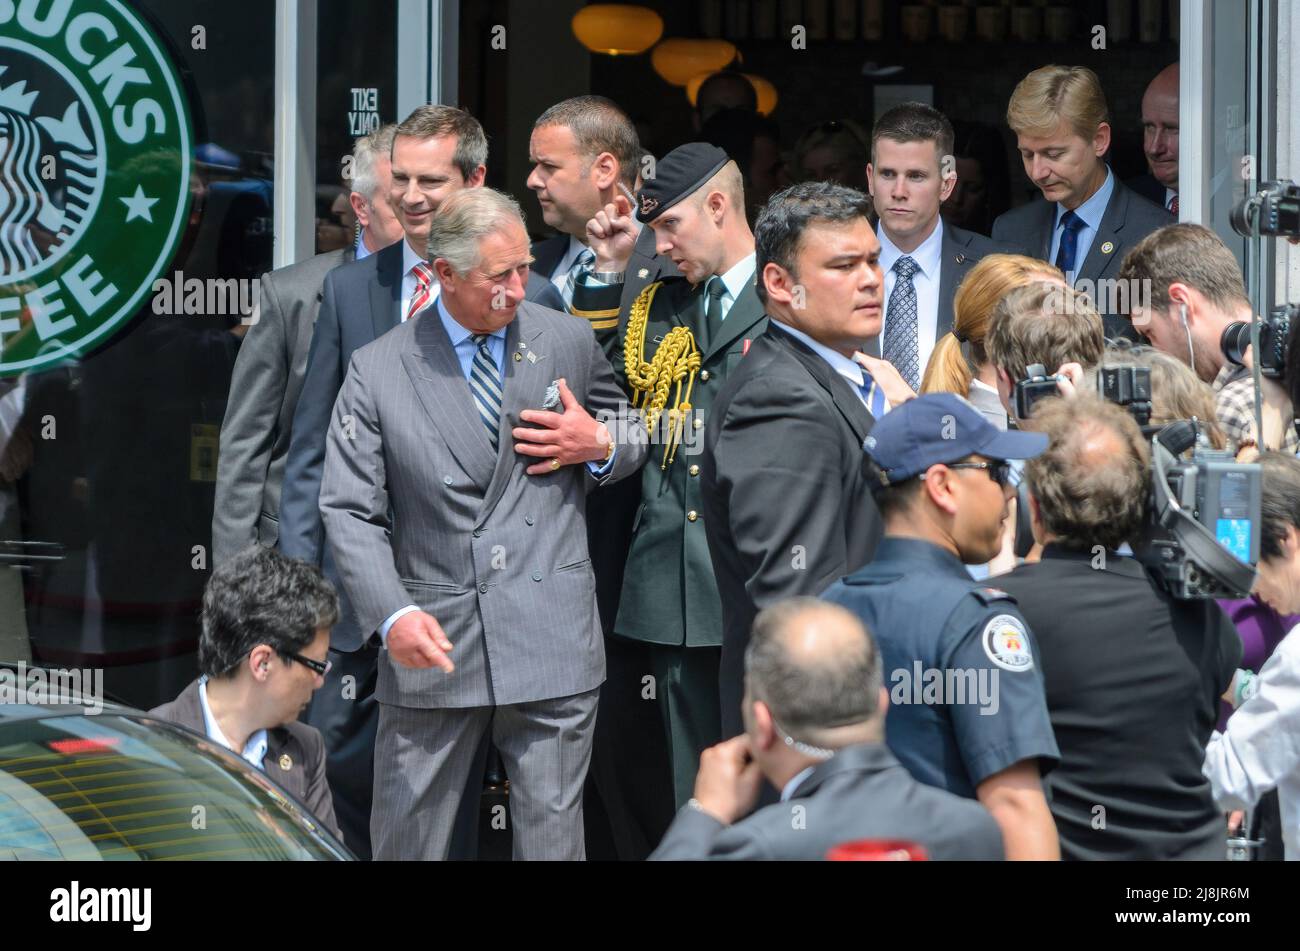 Toronto, Canada - May 22, 2012: Prince Charles visits Ryerson University. The visit was part of the Queen's Diamond Jubilee celebrations. Stock Photo